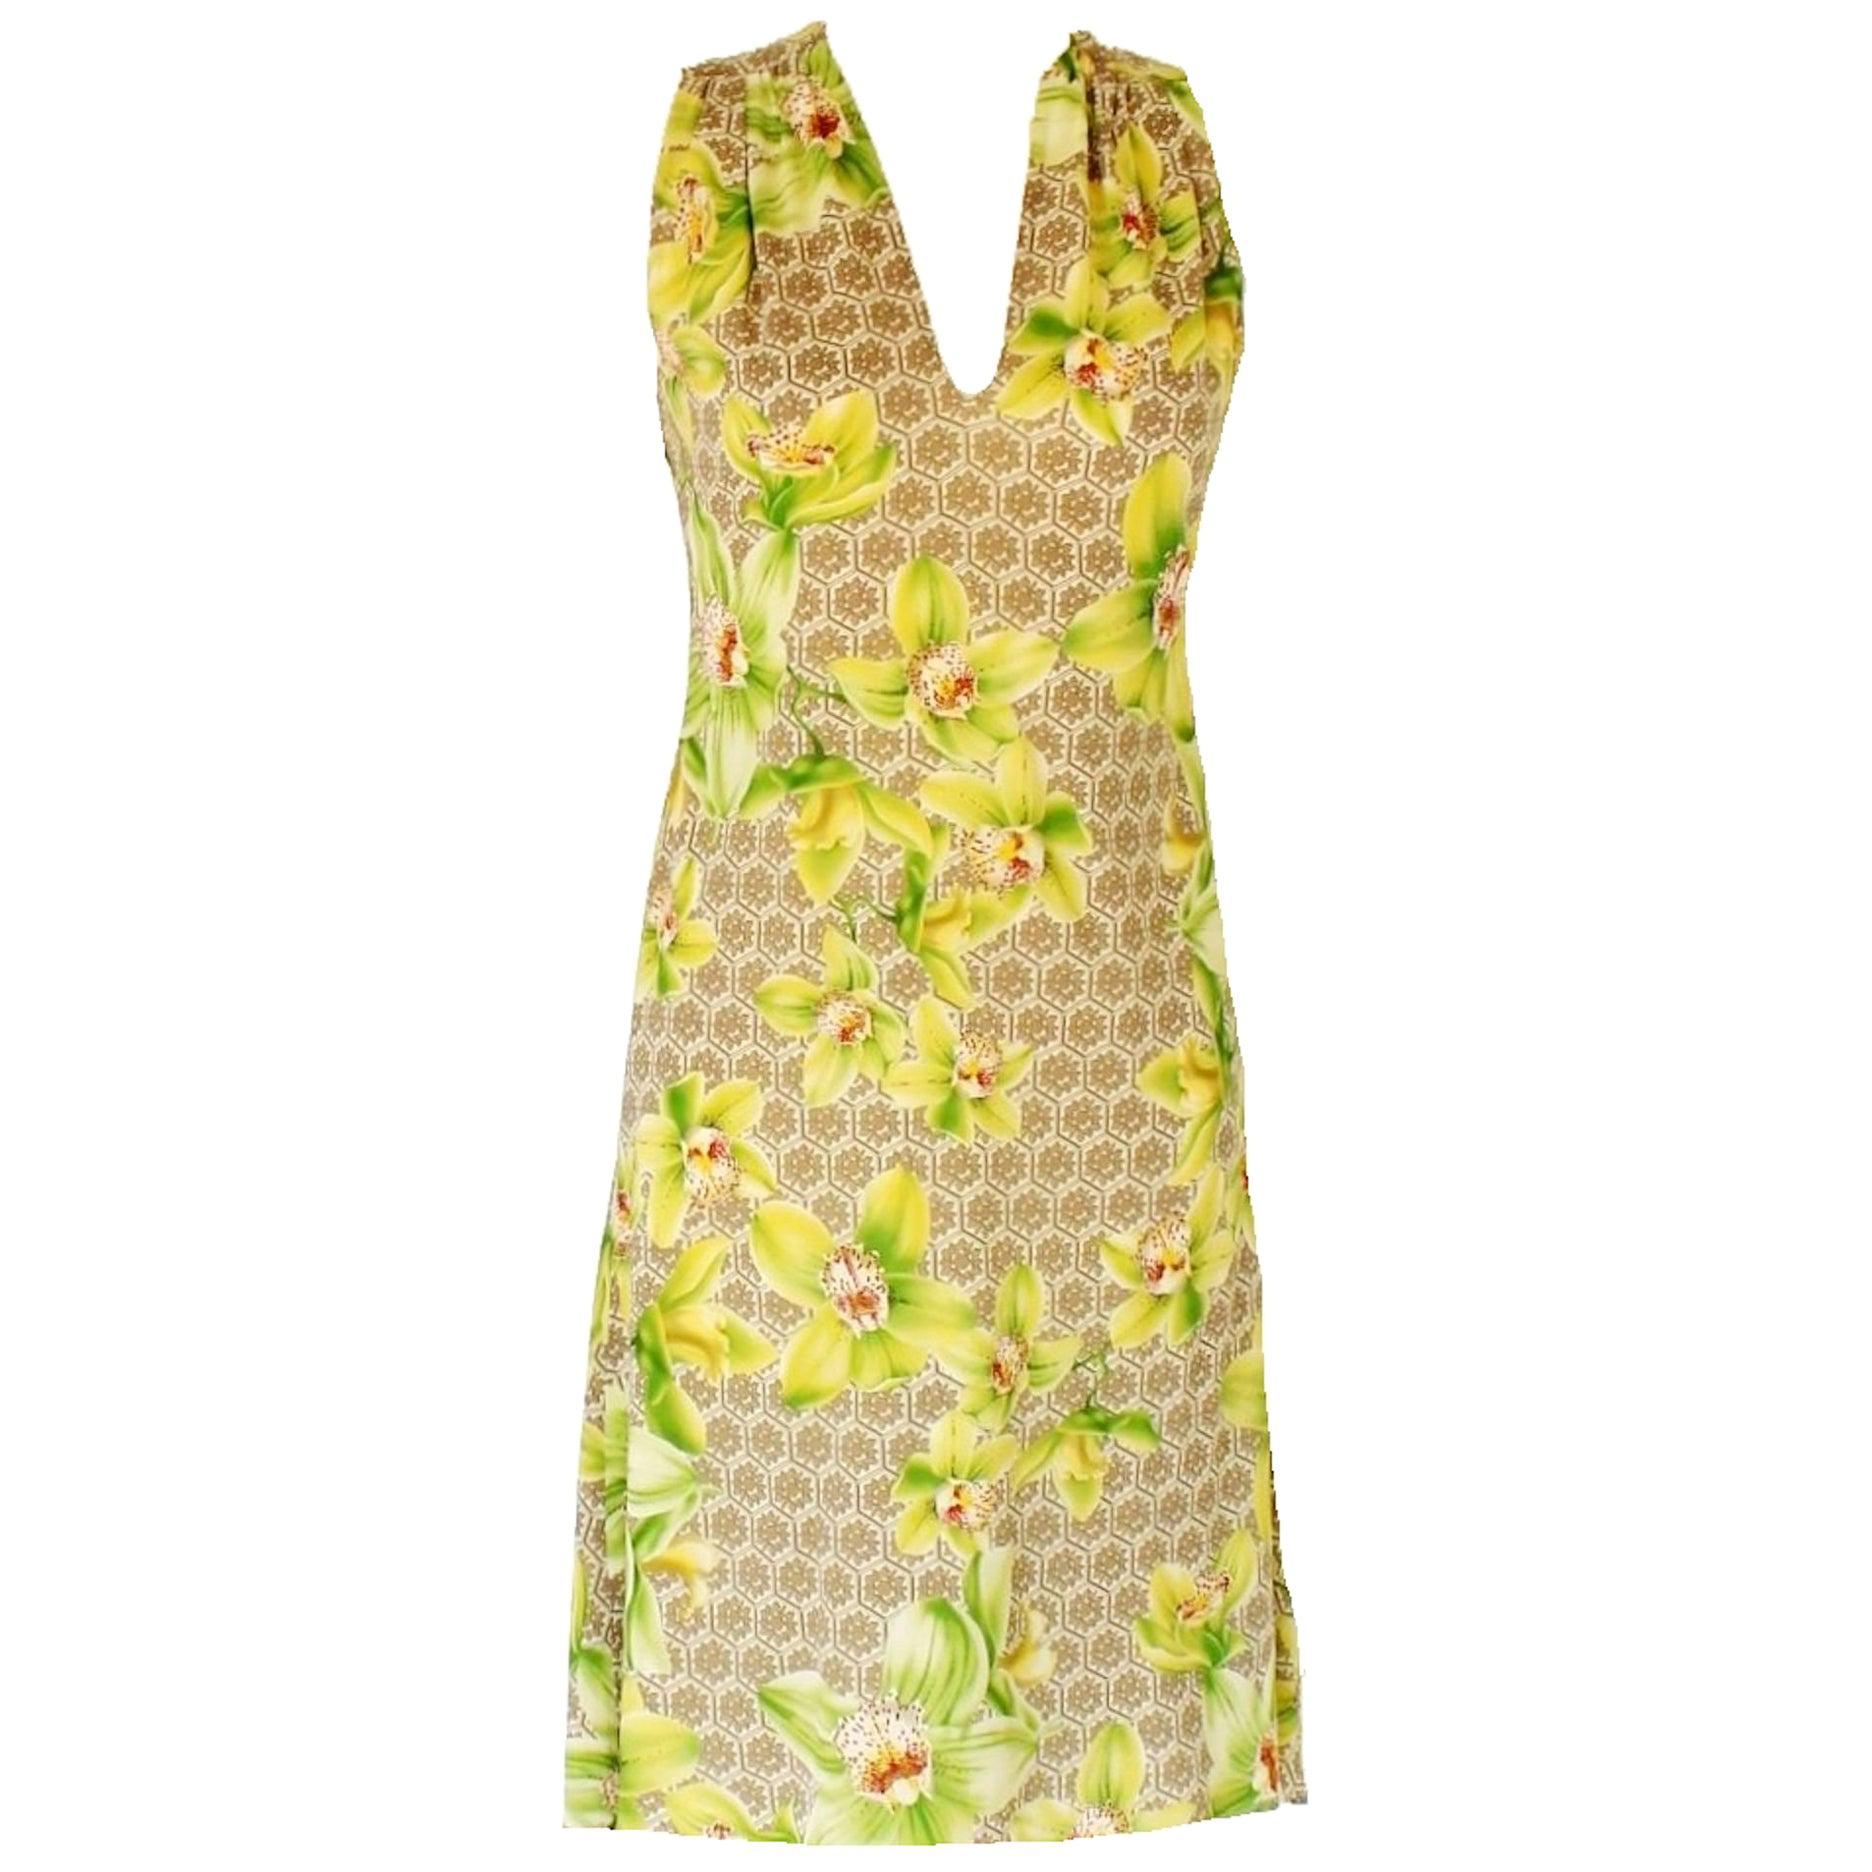 NEW Versace Arabesque & Floral Orchid Printed Silk Cocktail Dress